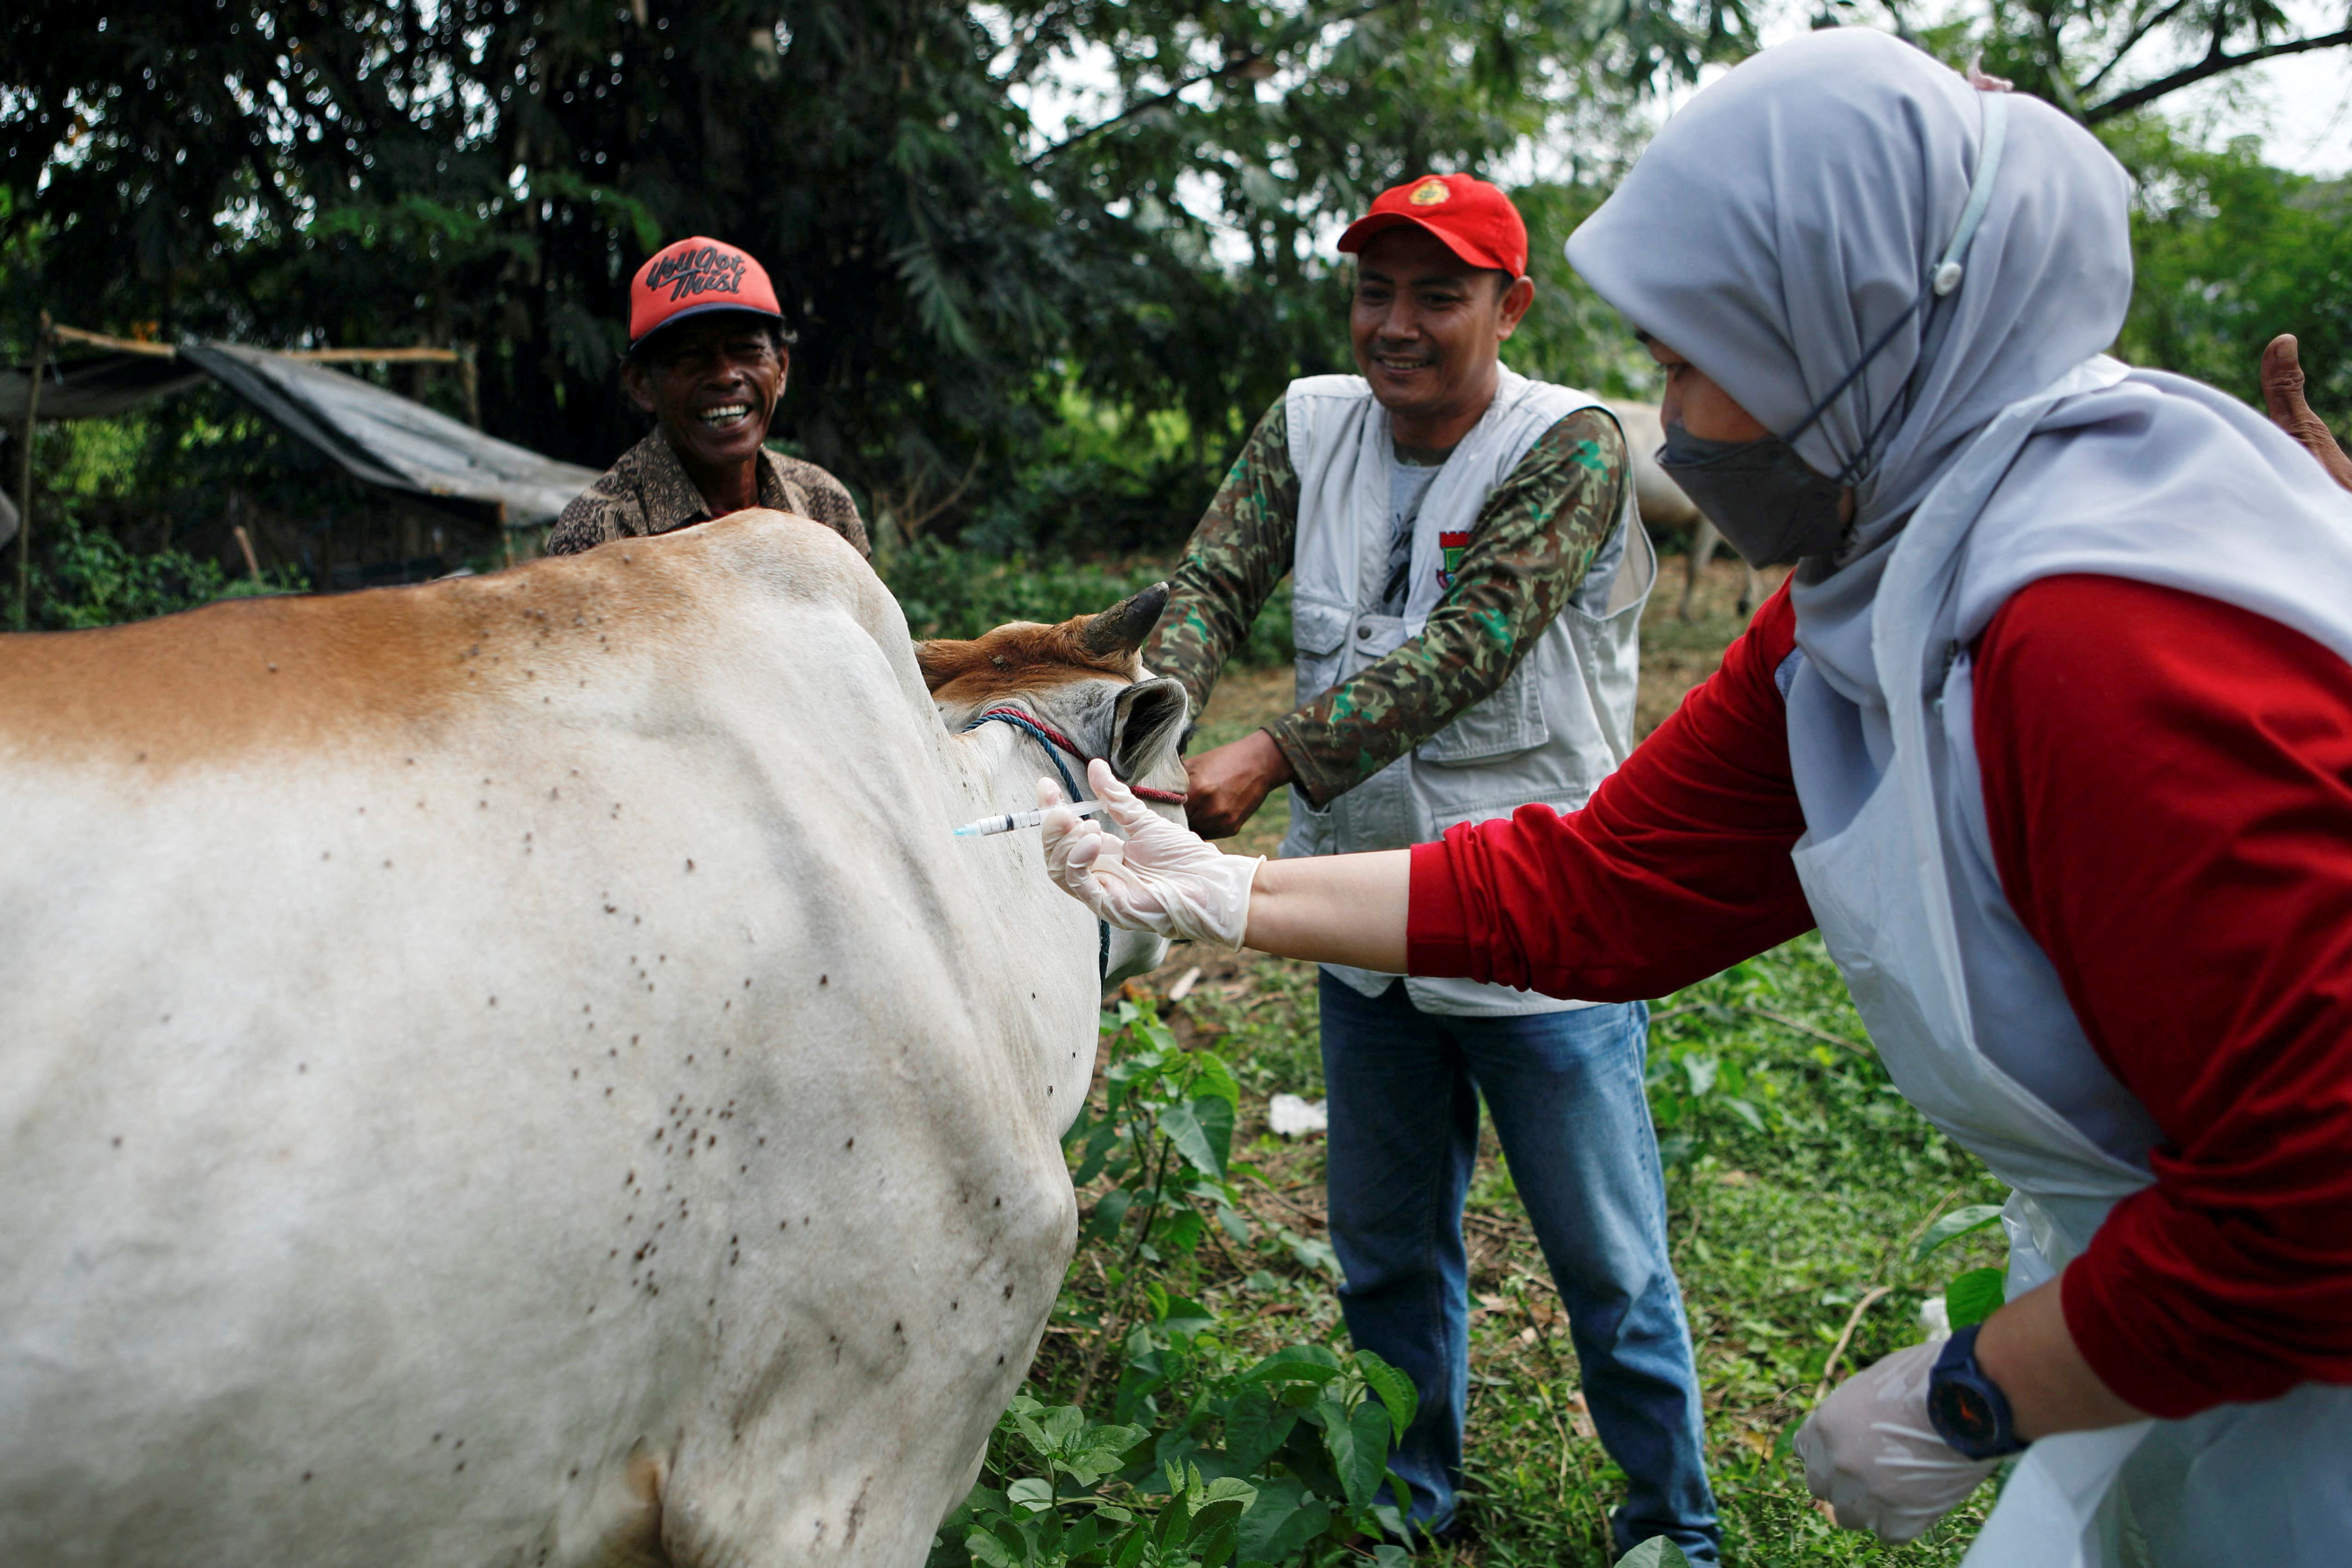 A department of Agriculture and Food Security officer injects a cow with a dose of vaccine to prevent the spread of foot and mouth disease at a cattle farm in Tangerang